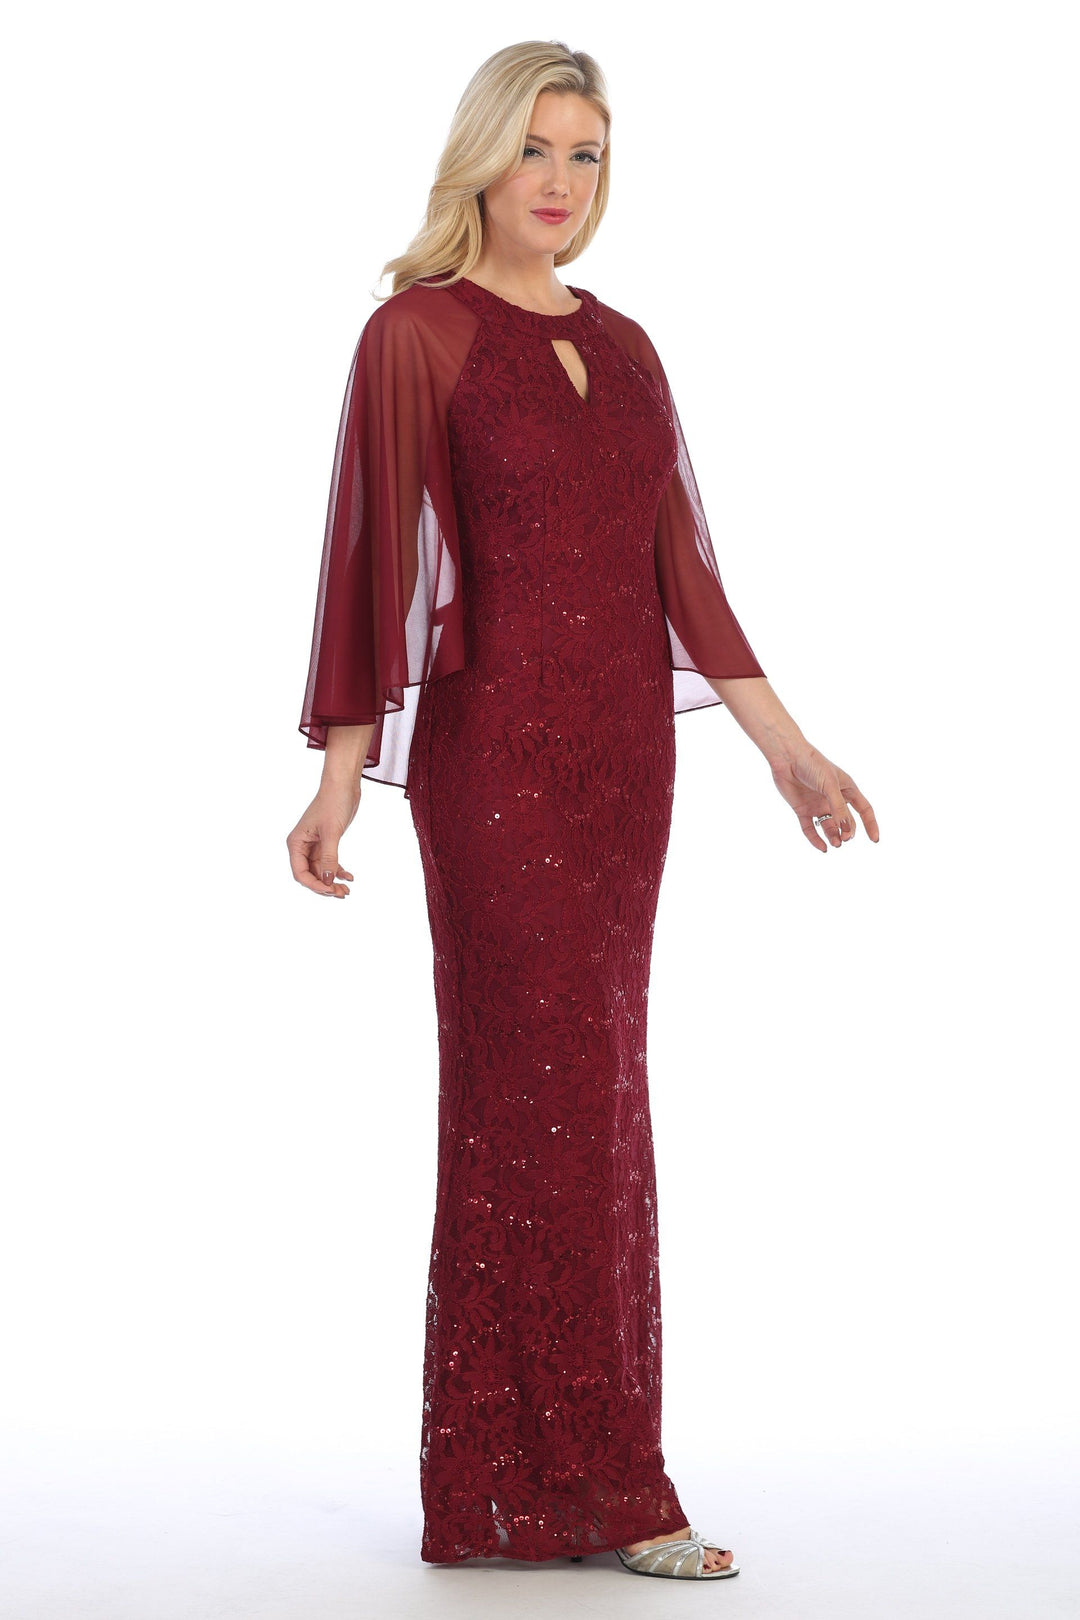 Sequin Lace Long Cape Dress with Flutter Sleeves by Celavie 6352-L-Long Formal Dresses-ABC Fashion